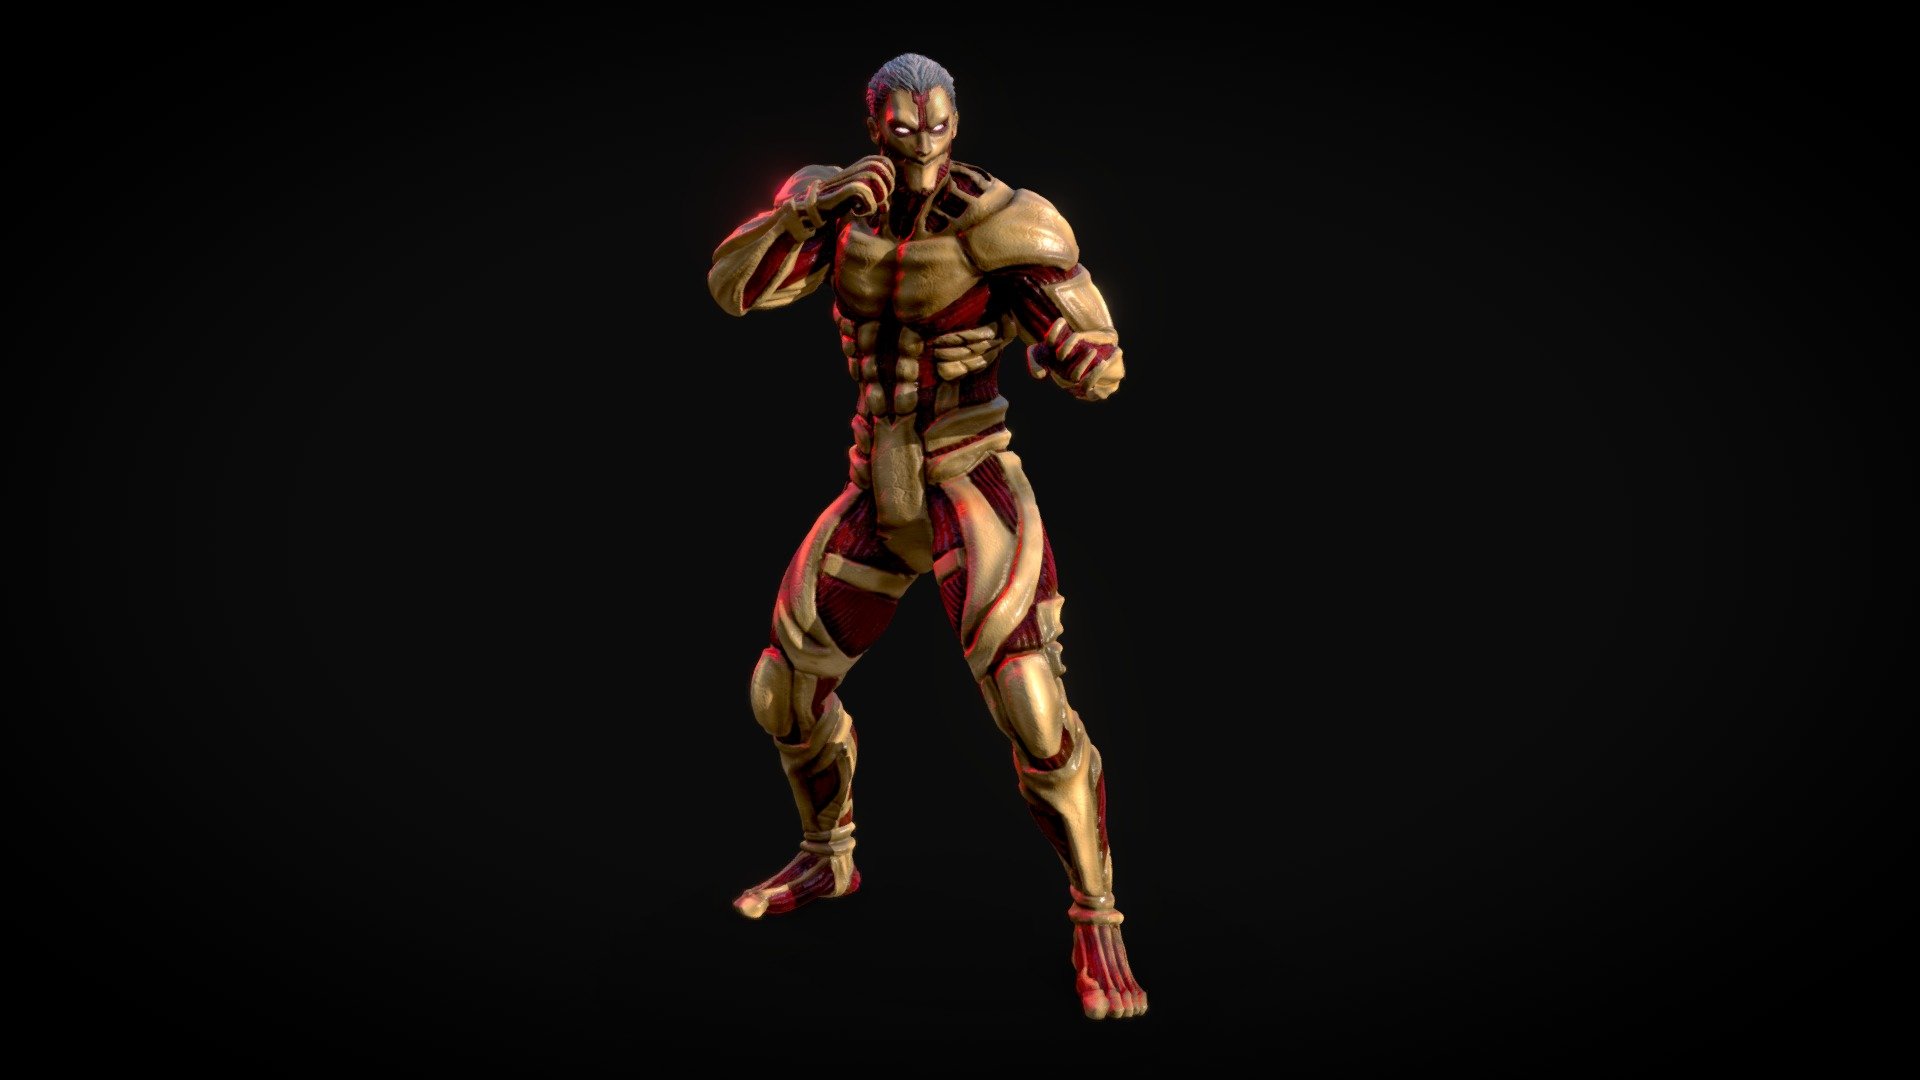 Attack On Titans - A 3D model collection by fujimi0 - Sketchfab